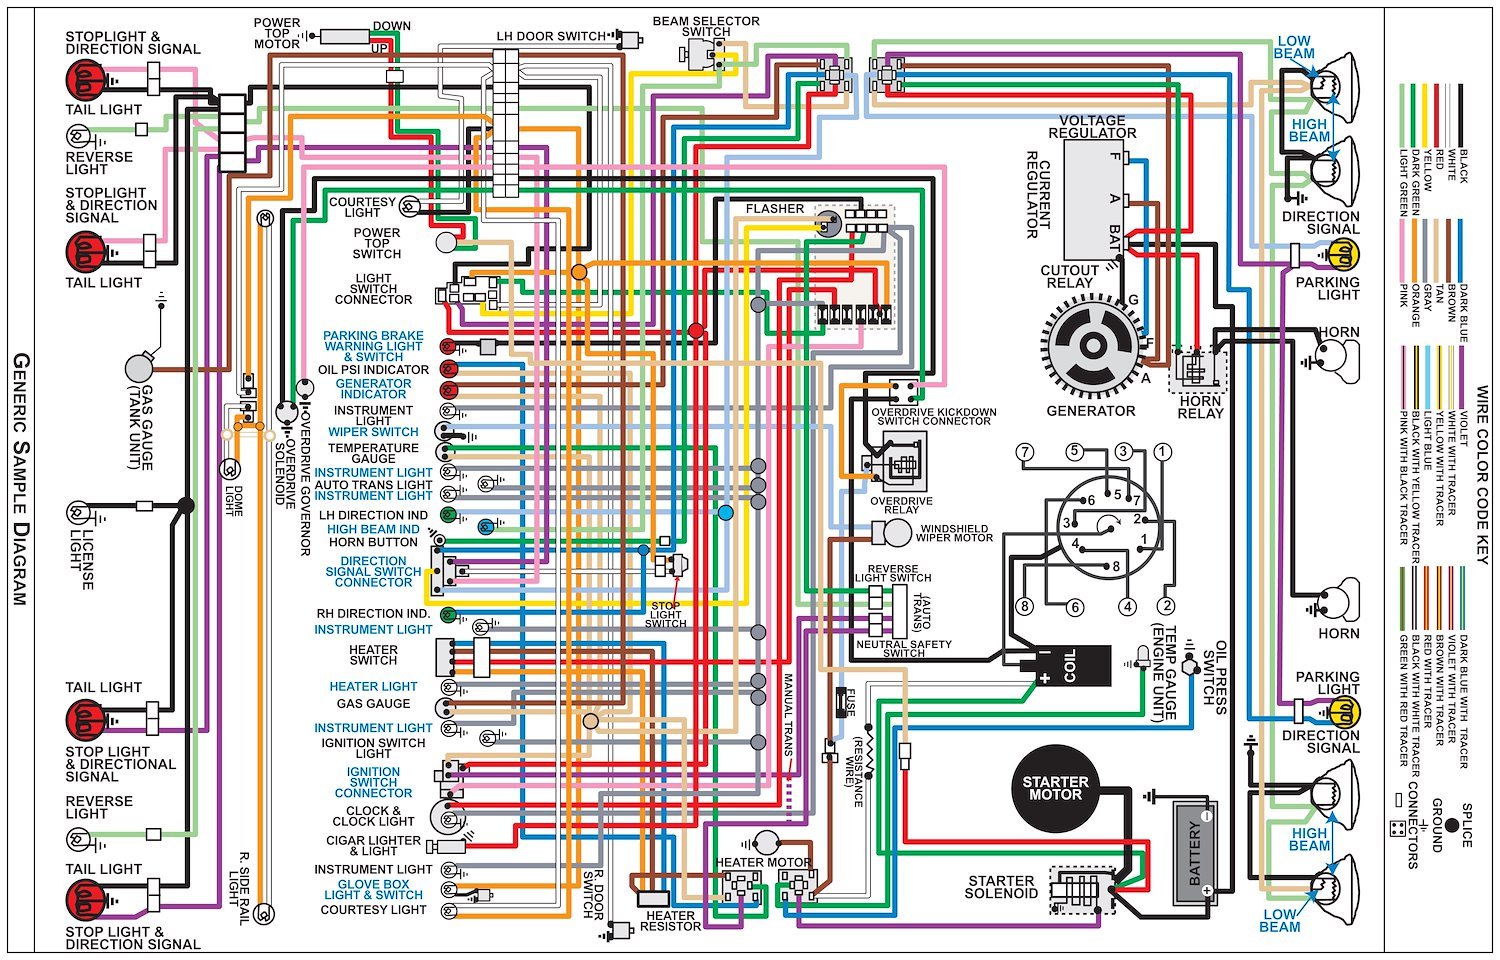 Wiring Diagram for 1969 Ford Falcon, 11 in x 17 in., Laminated